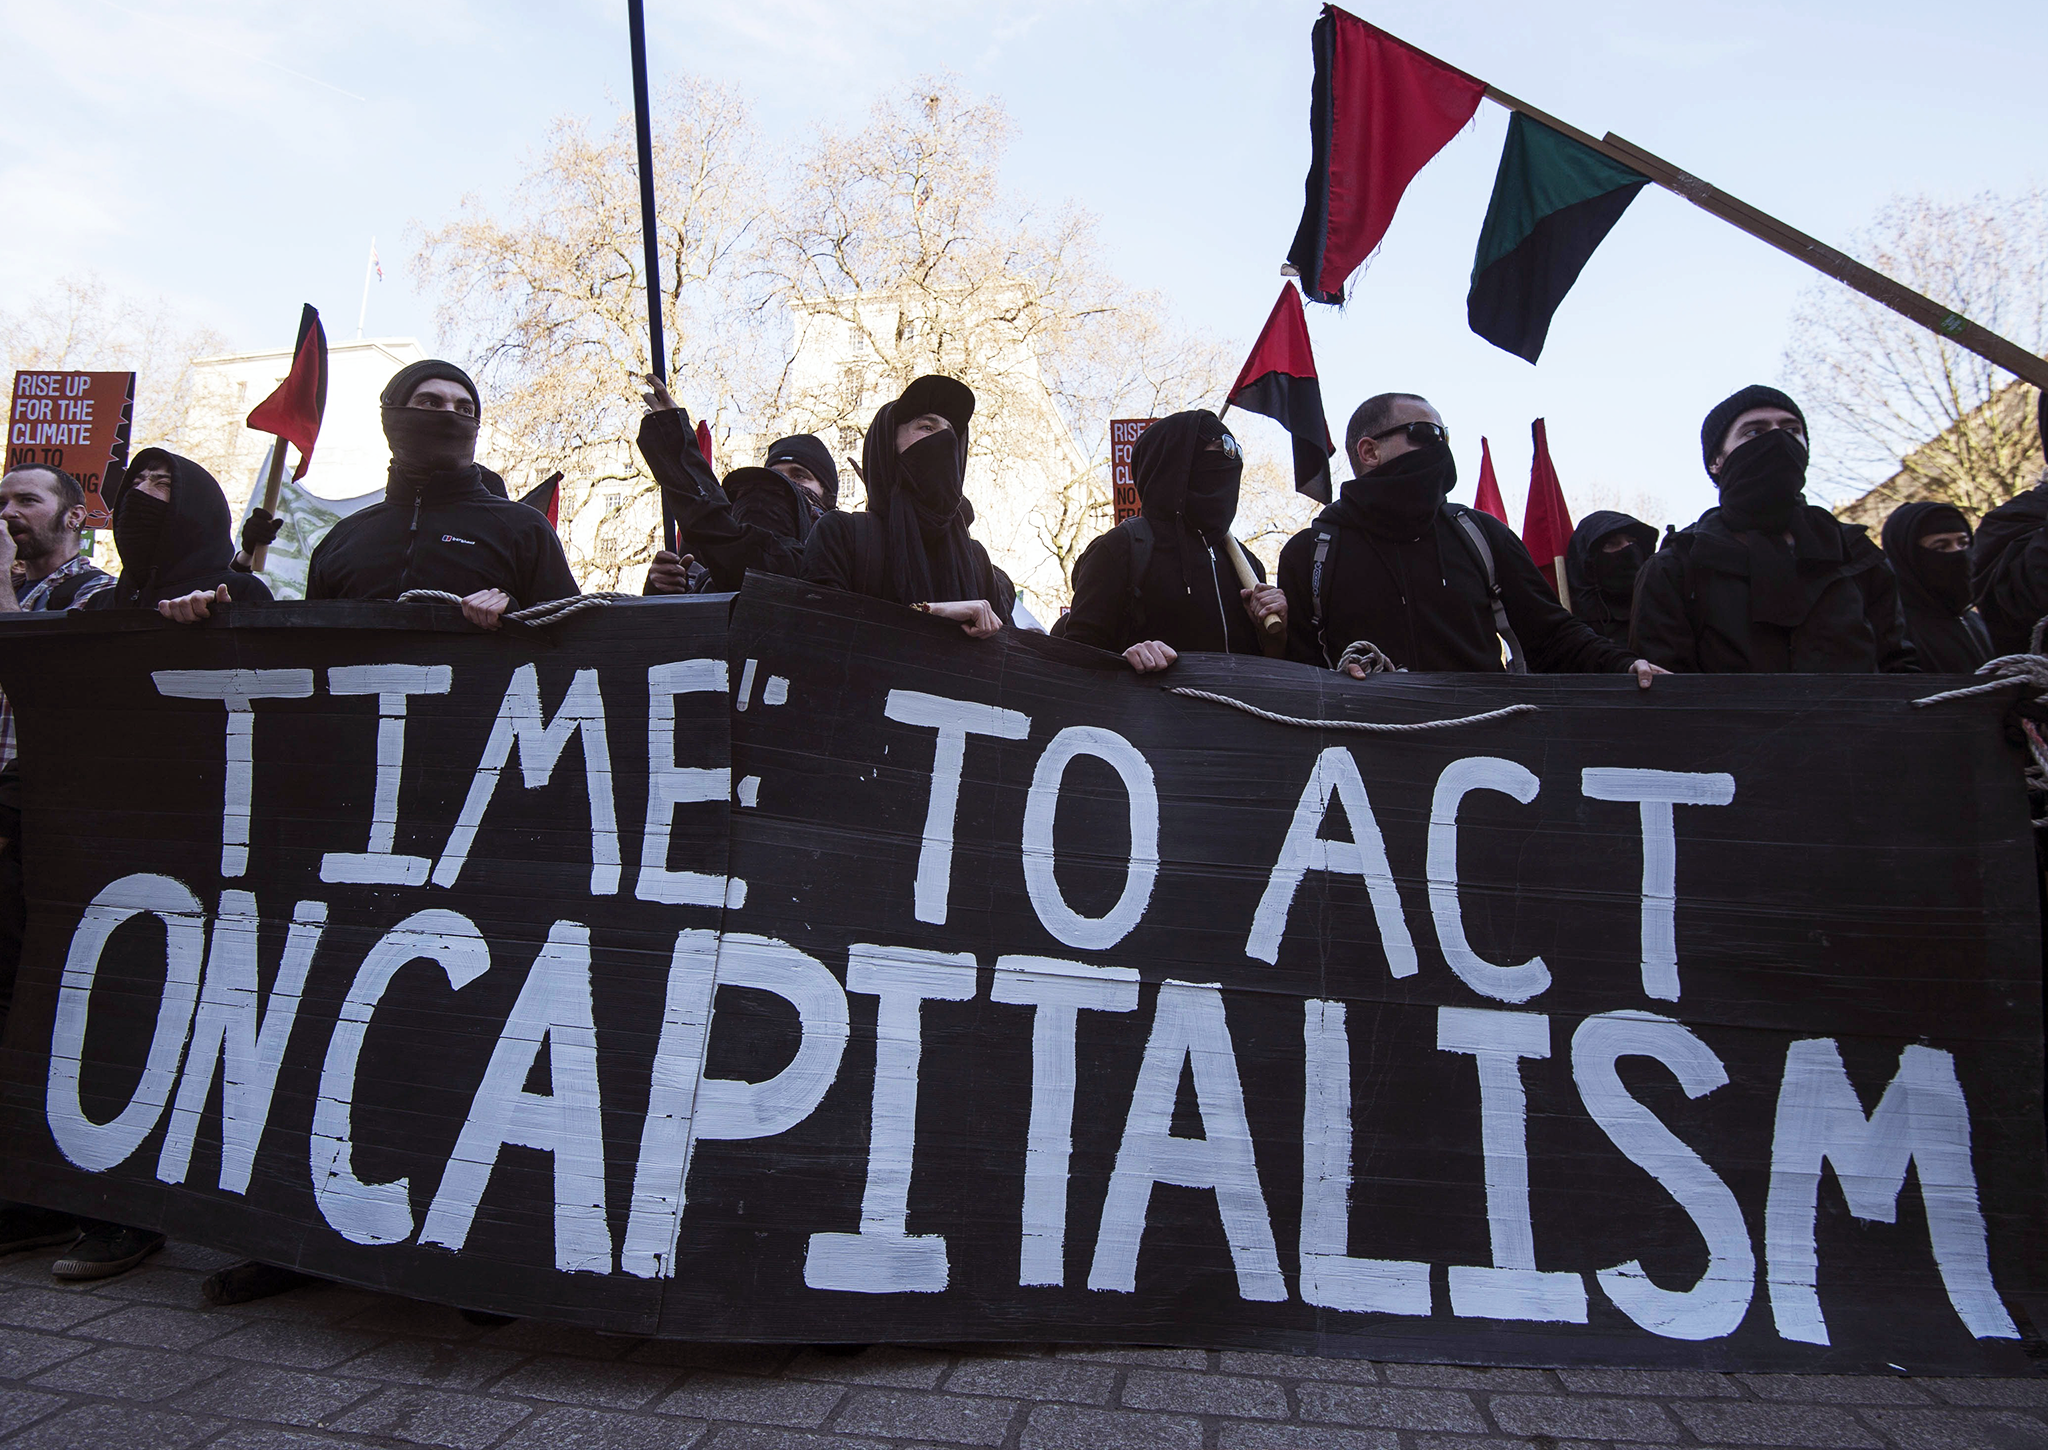 Anti-capitalist demonstrators display a banner outside Downing Street in March, 2015